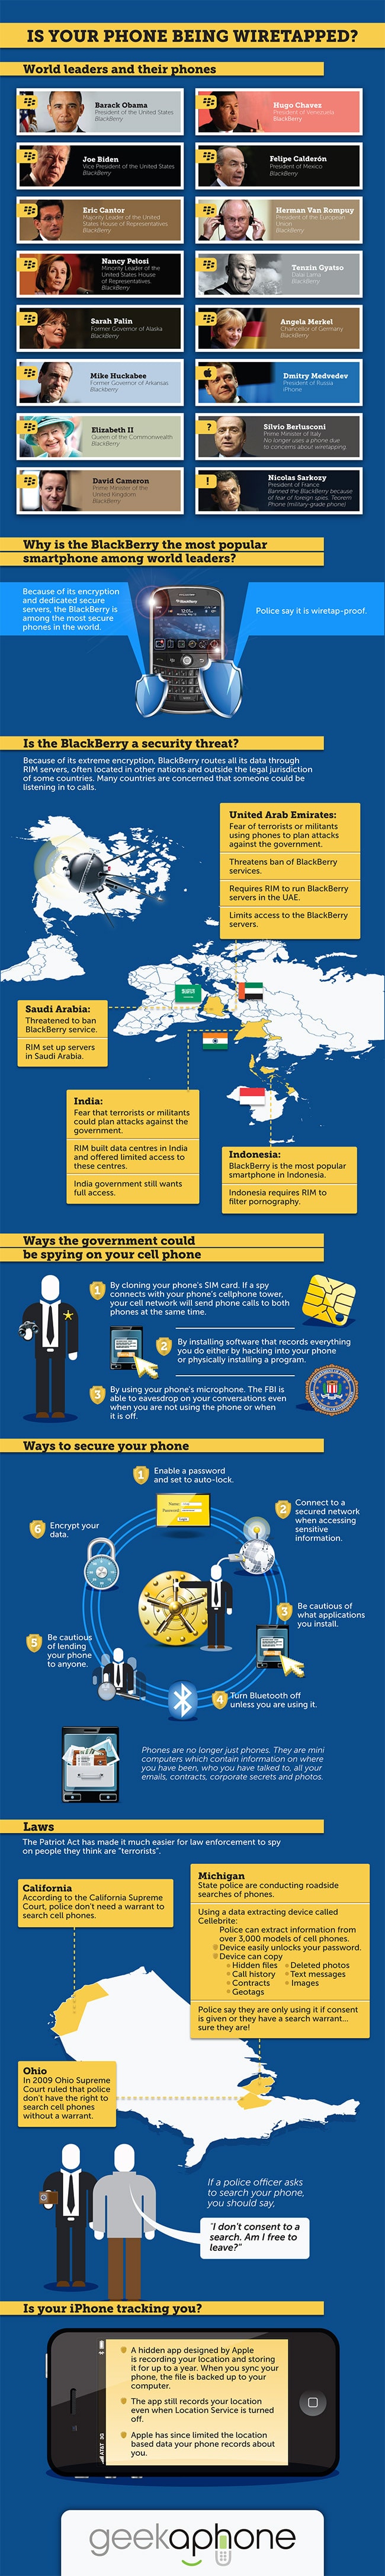 Mobile Security Wiretapping Methods Infographic